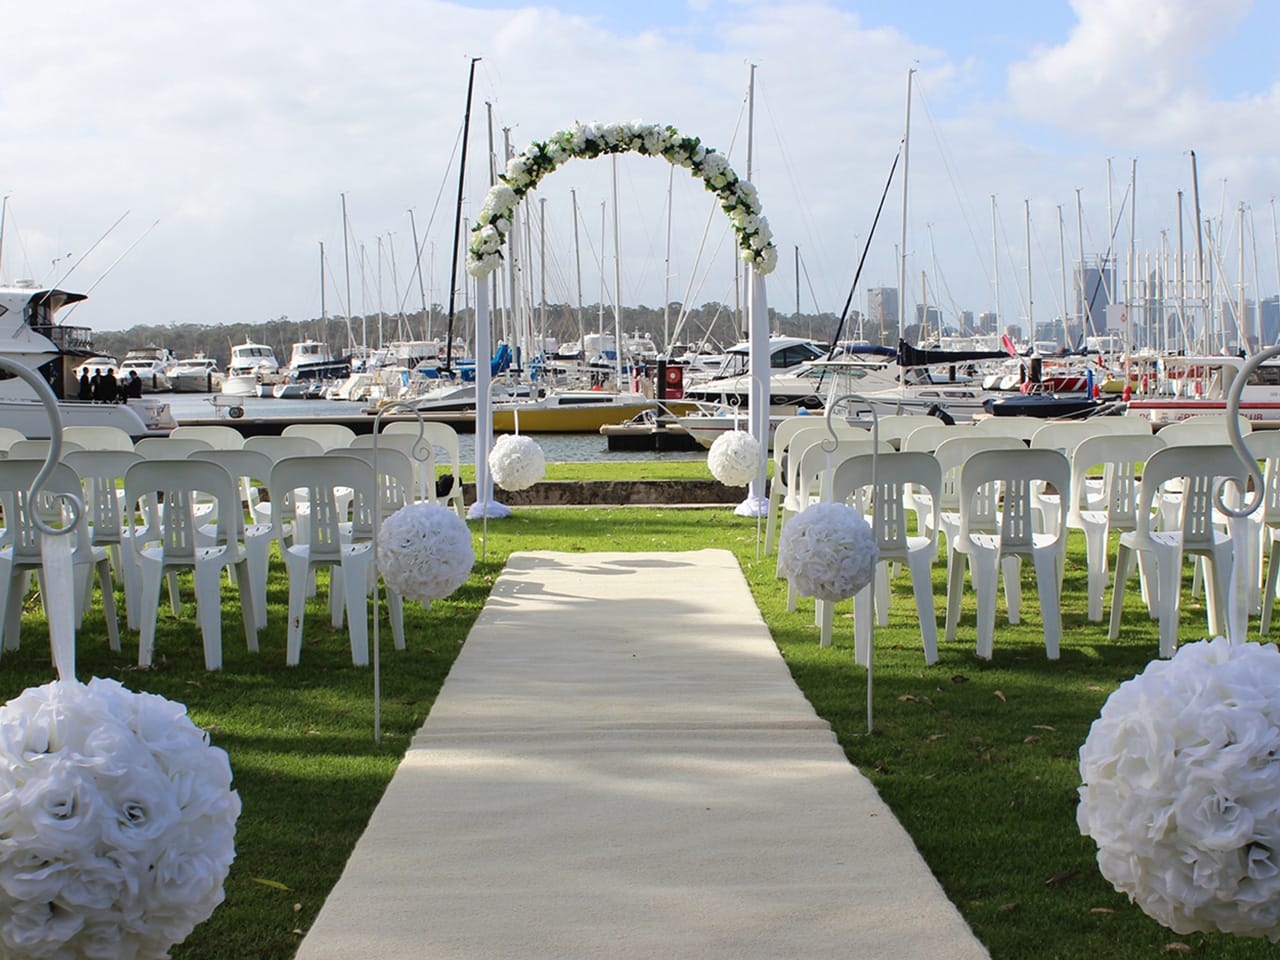 Wedding Ceremony Setup Near The Sea With White Carpet, Flowers, Flower Arc And Boats Behind